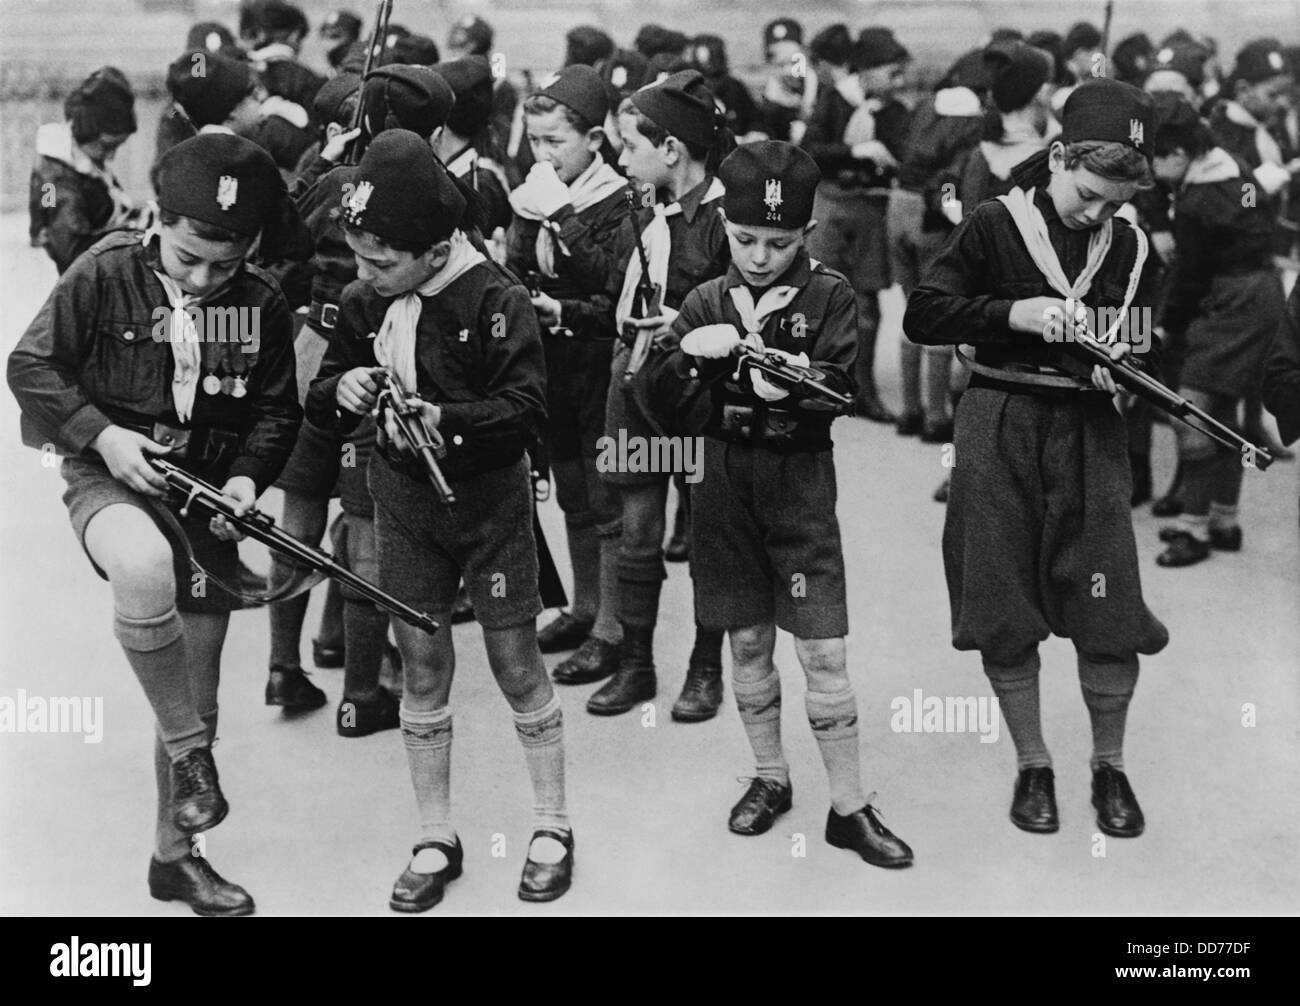 Boys of the Balilla, a fascist youth group, learning to load small rifles. Rome, Italy, 1930s. (BSLOC 2013 9 130) Stock Photo